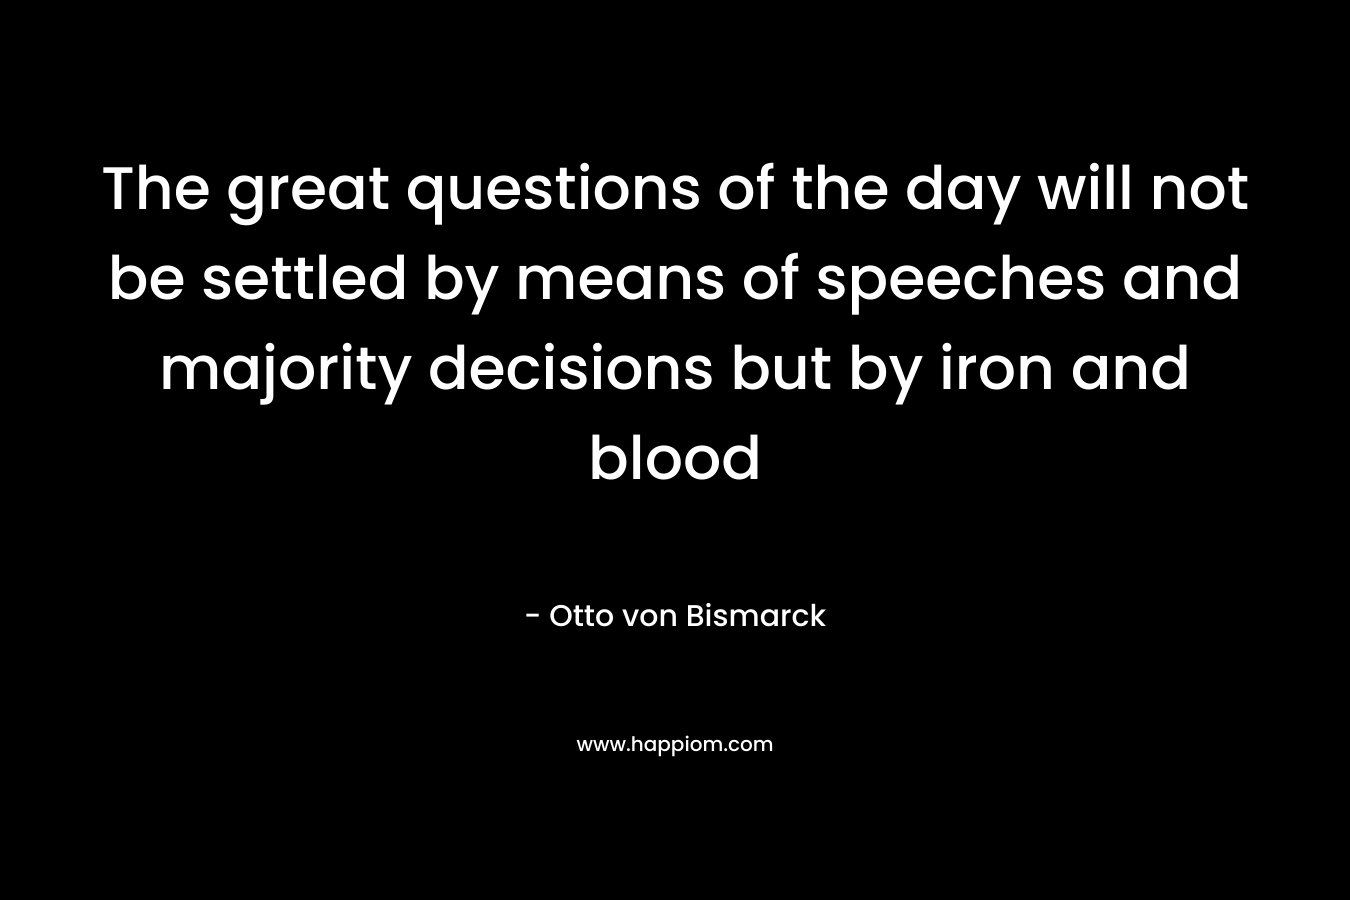 The great questions of the day will not be settled by means of speeches and majority decisions but by iron and blood – Otto von Bismarck